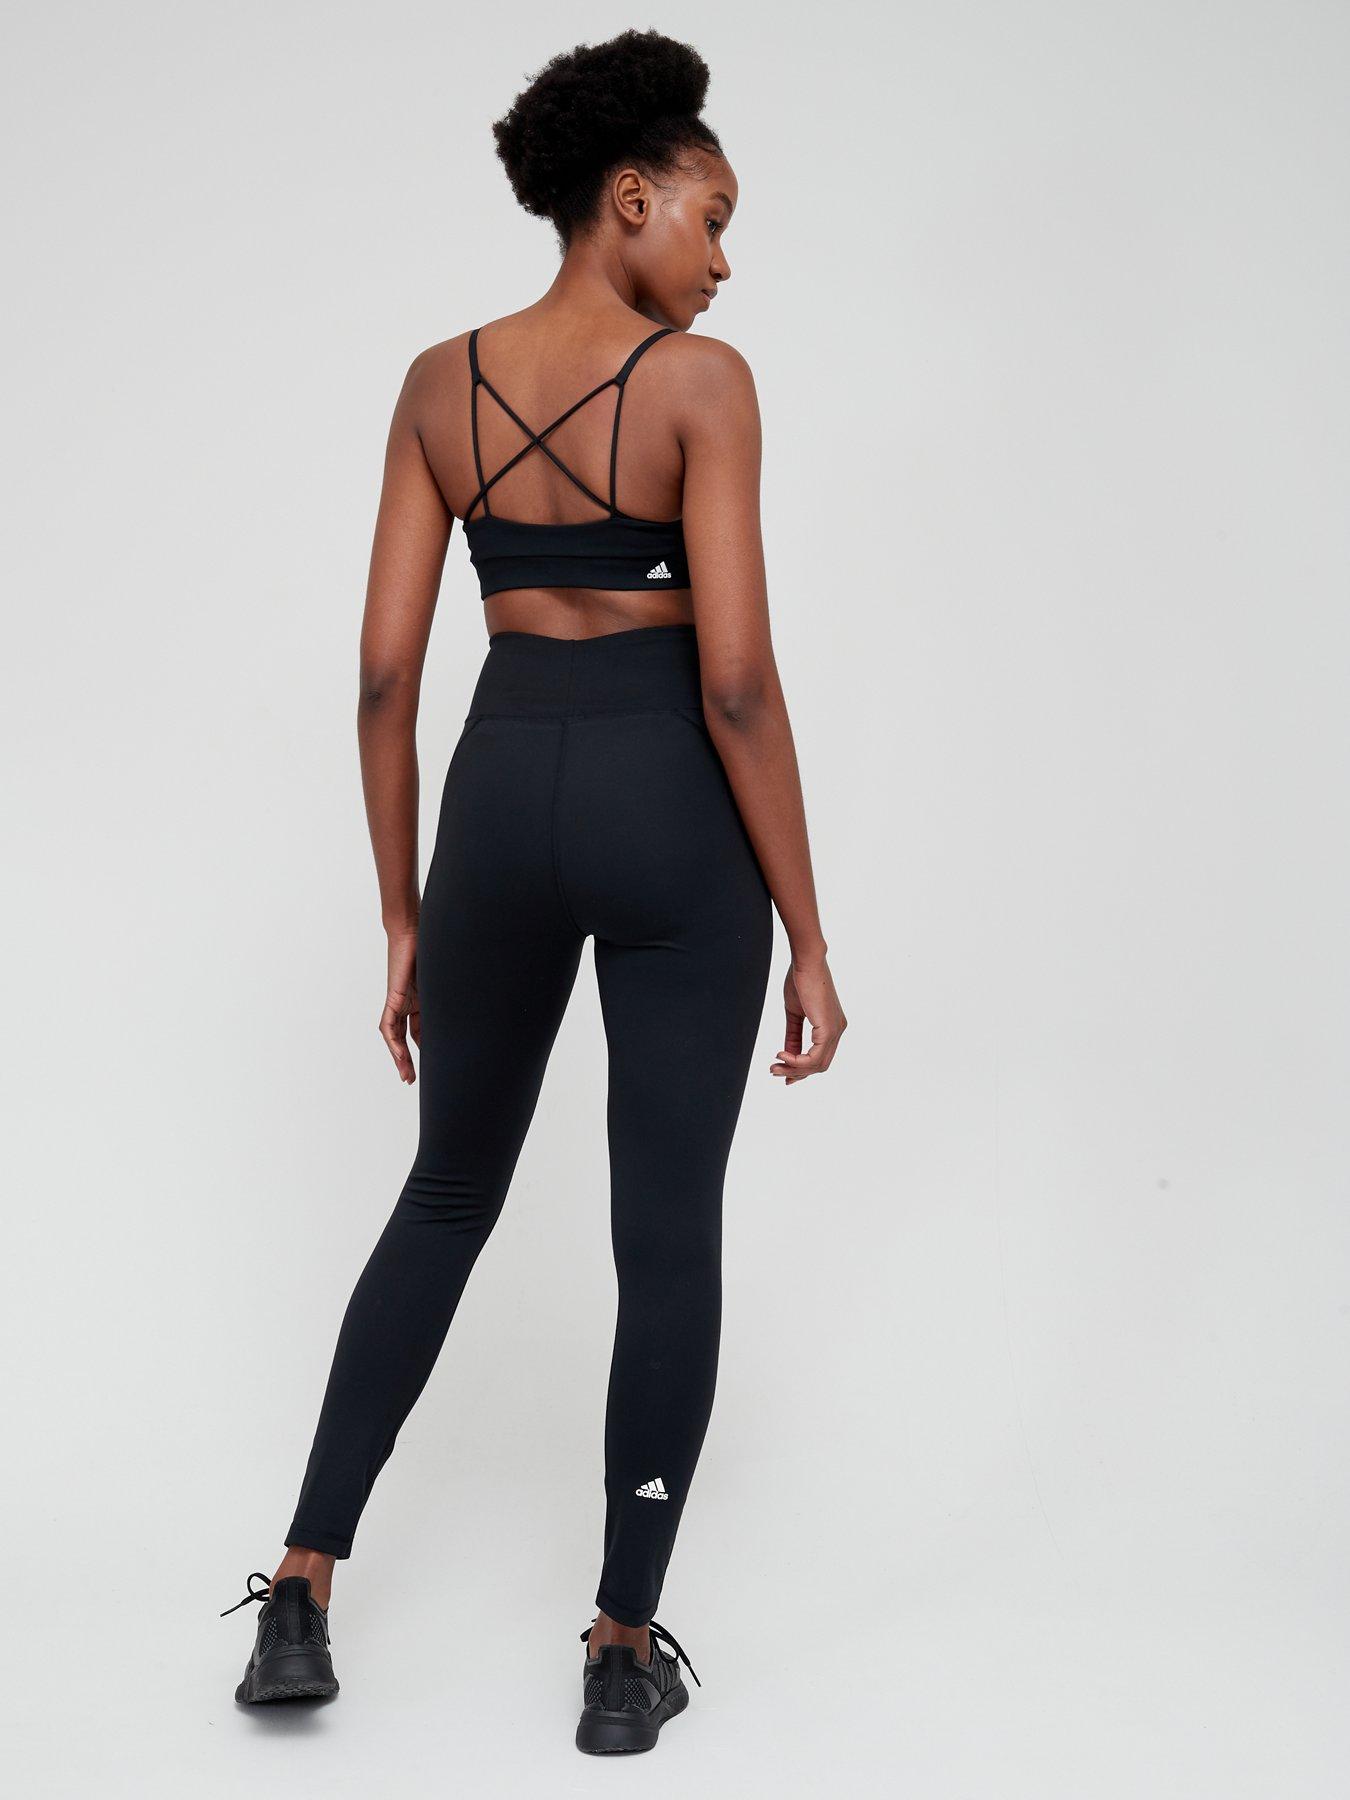  Free People Women's Spin Yoga Performance Leggings (Black, Small  S, 4-6) : Clothing, Shoes & Jewelry